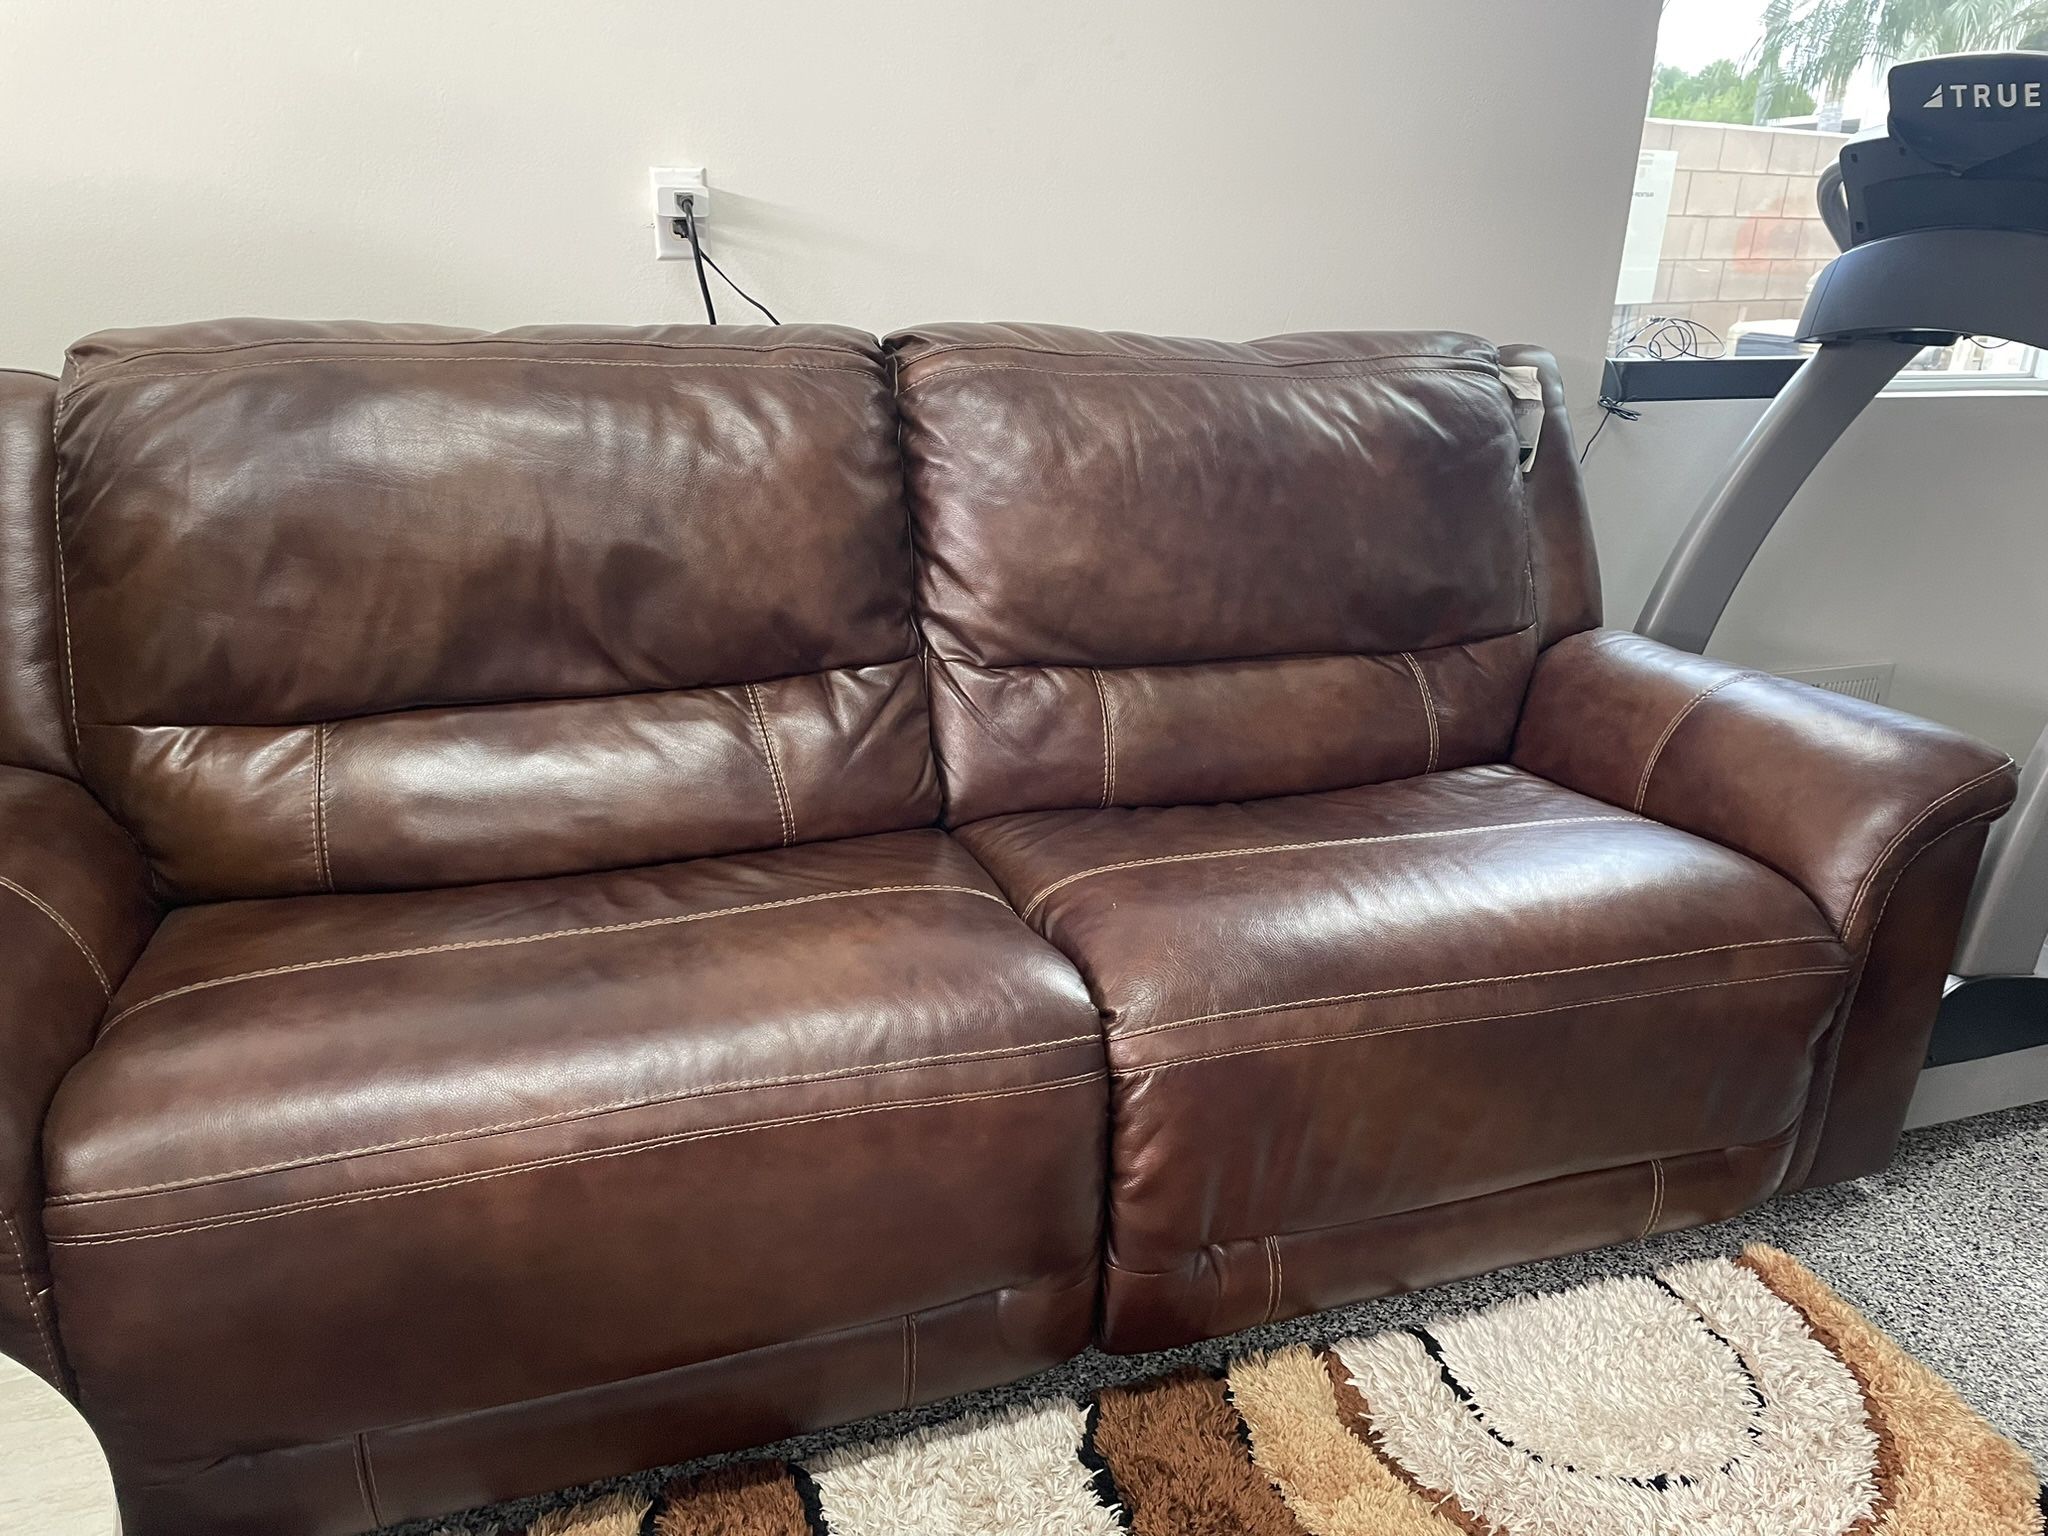 Ashley Leather Recliner Couch